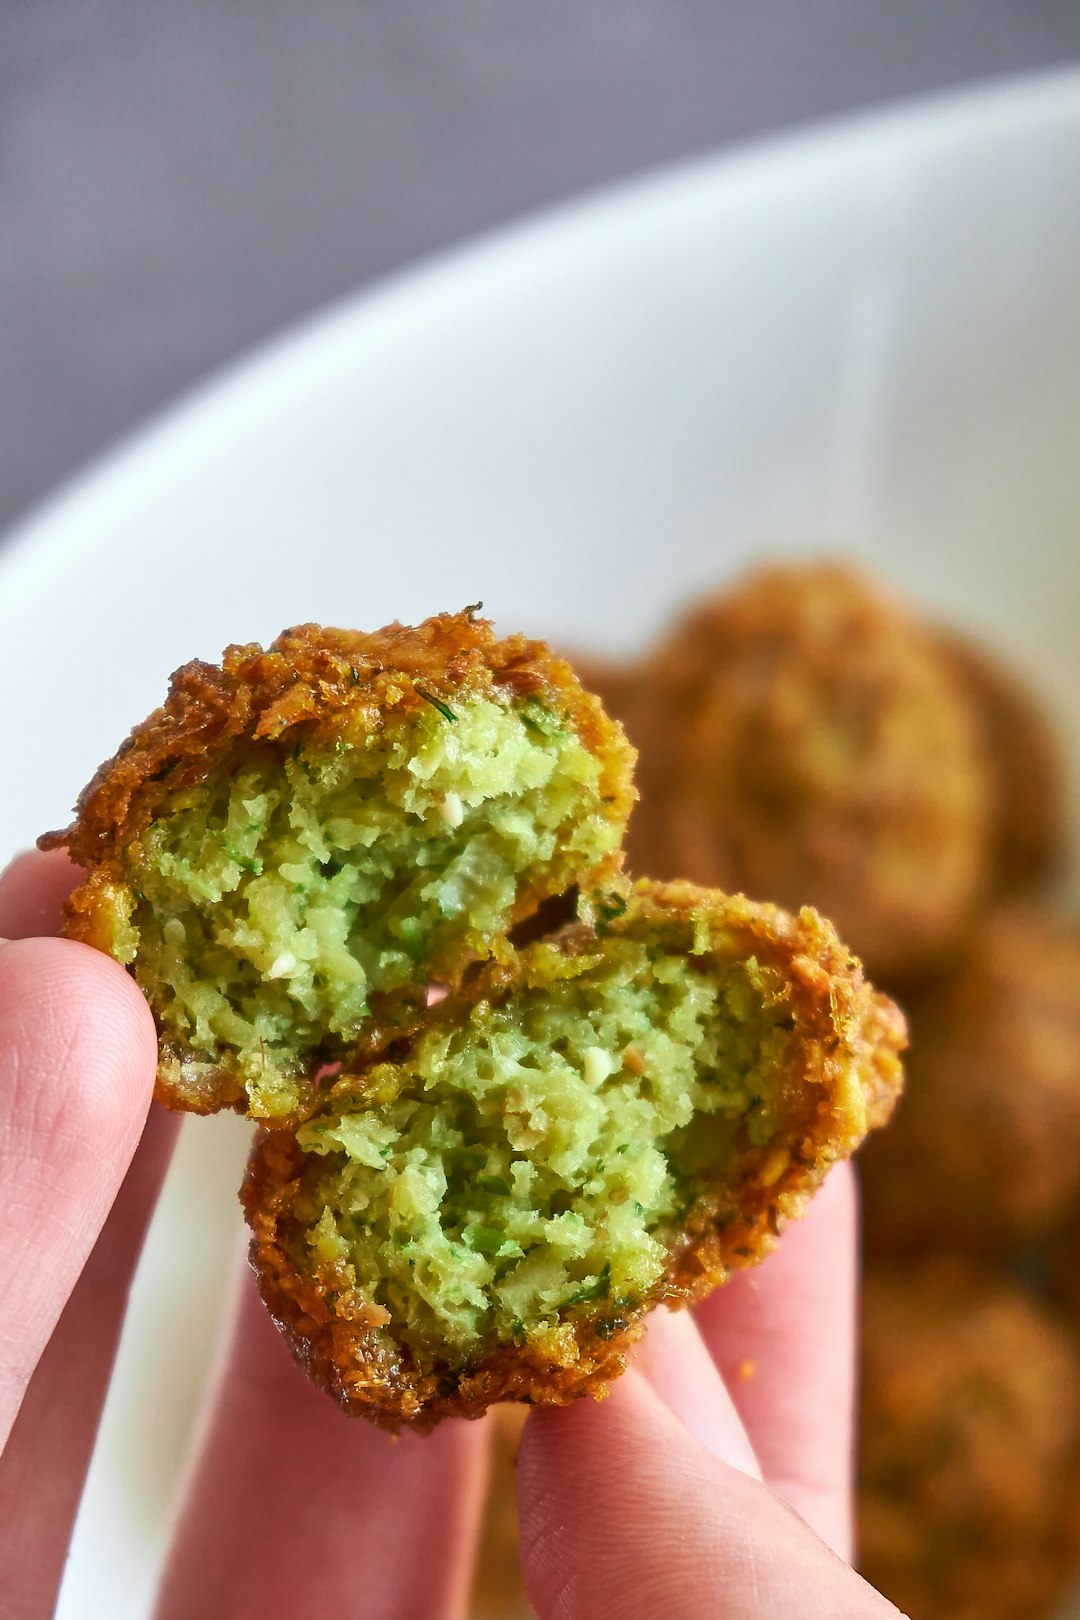 Gluten-free falafel balls 🧆🌾🚫 -- Thanks for visiting! Donations help & motivate me to keep uploading more 📸's. Even a buck or two helps. ➡️ https://www.buymeacoffee.com/uniqueton Found my photos useful? feel free to contact me about anything at email: uniquetonshots@gmail.com IG: @uniquetonshots